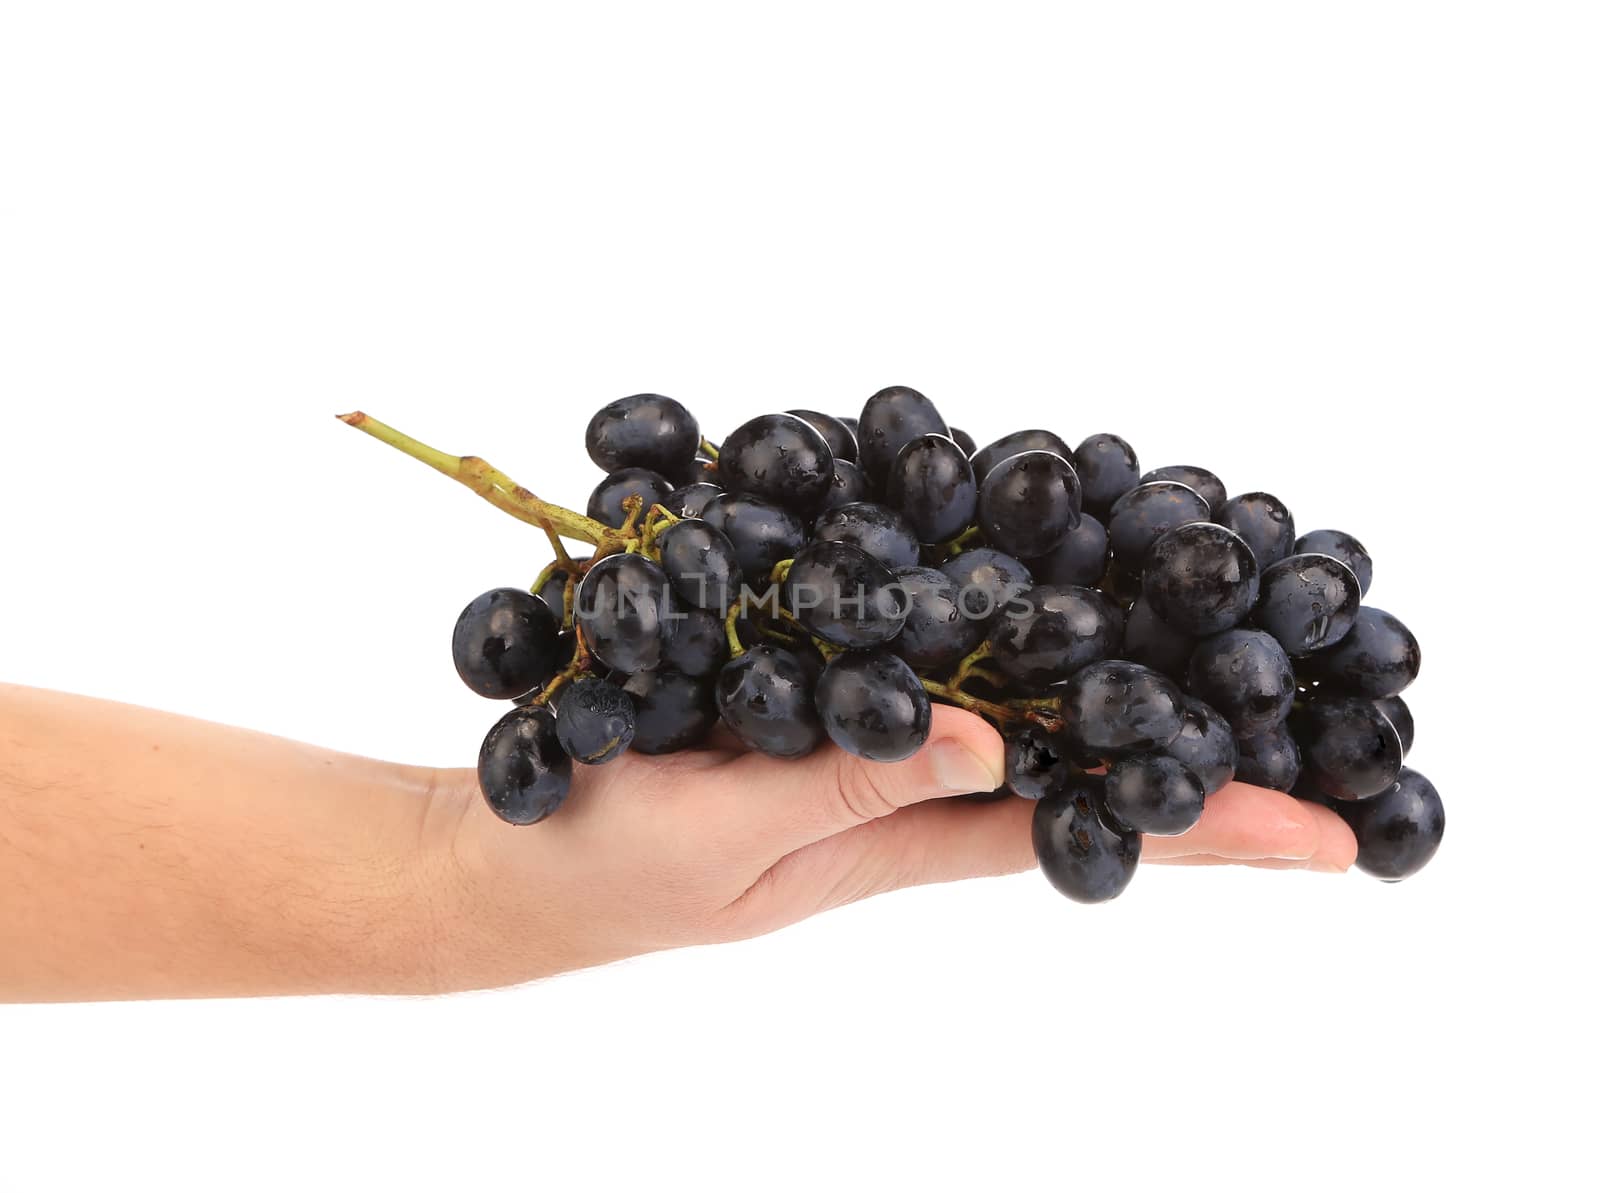 Black grapes in hand. Isolated on a white background.